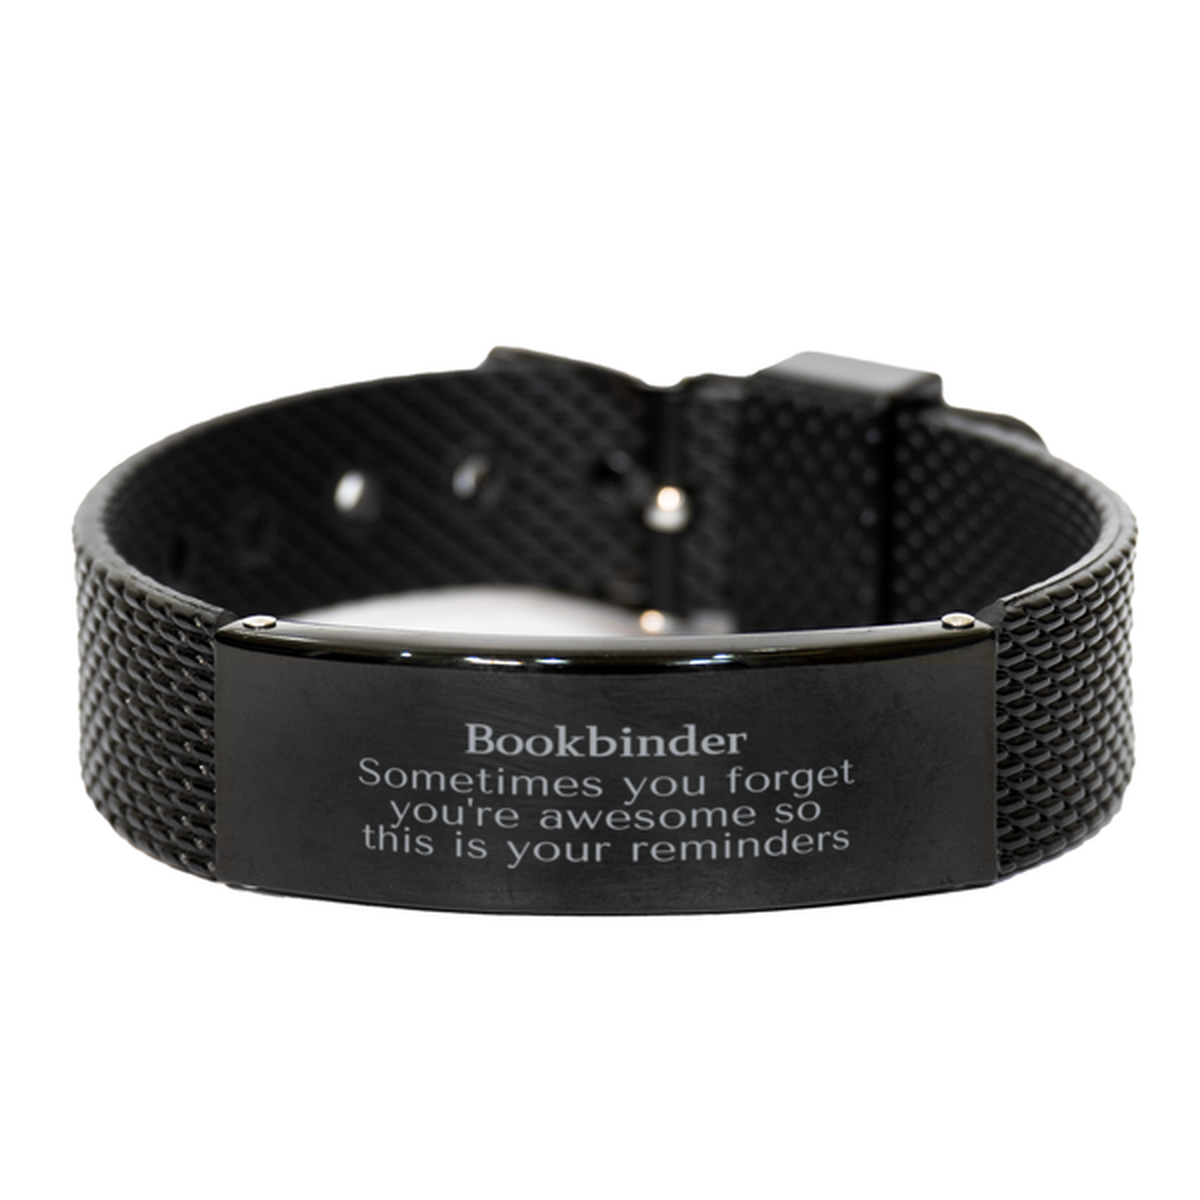 Sentimental Bookbinder Black Shark Mesh Bracelet, Bookbinder Sometimes you forget you're awesome so this is your reminders, Graduation Christmas Birthday Gifts for Bookbinder, Men, Women, Coworkers